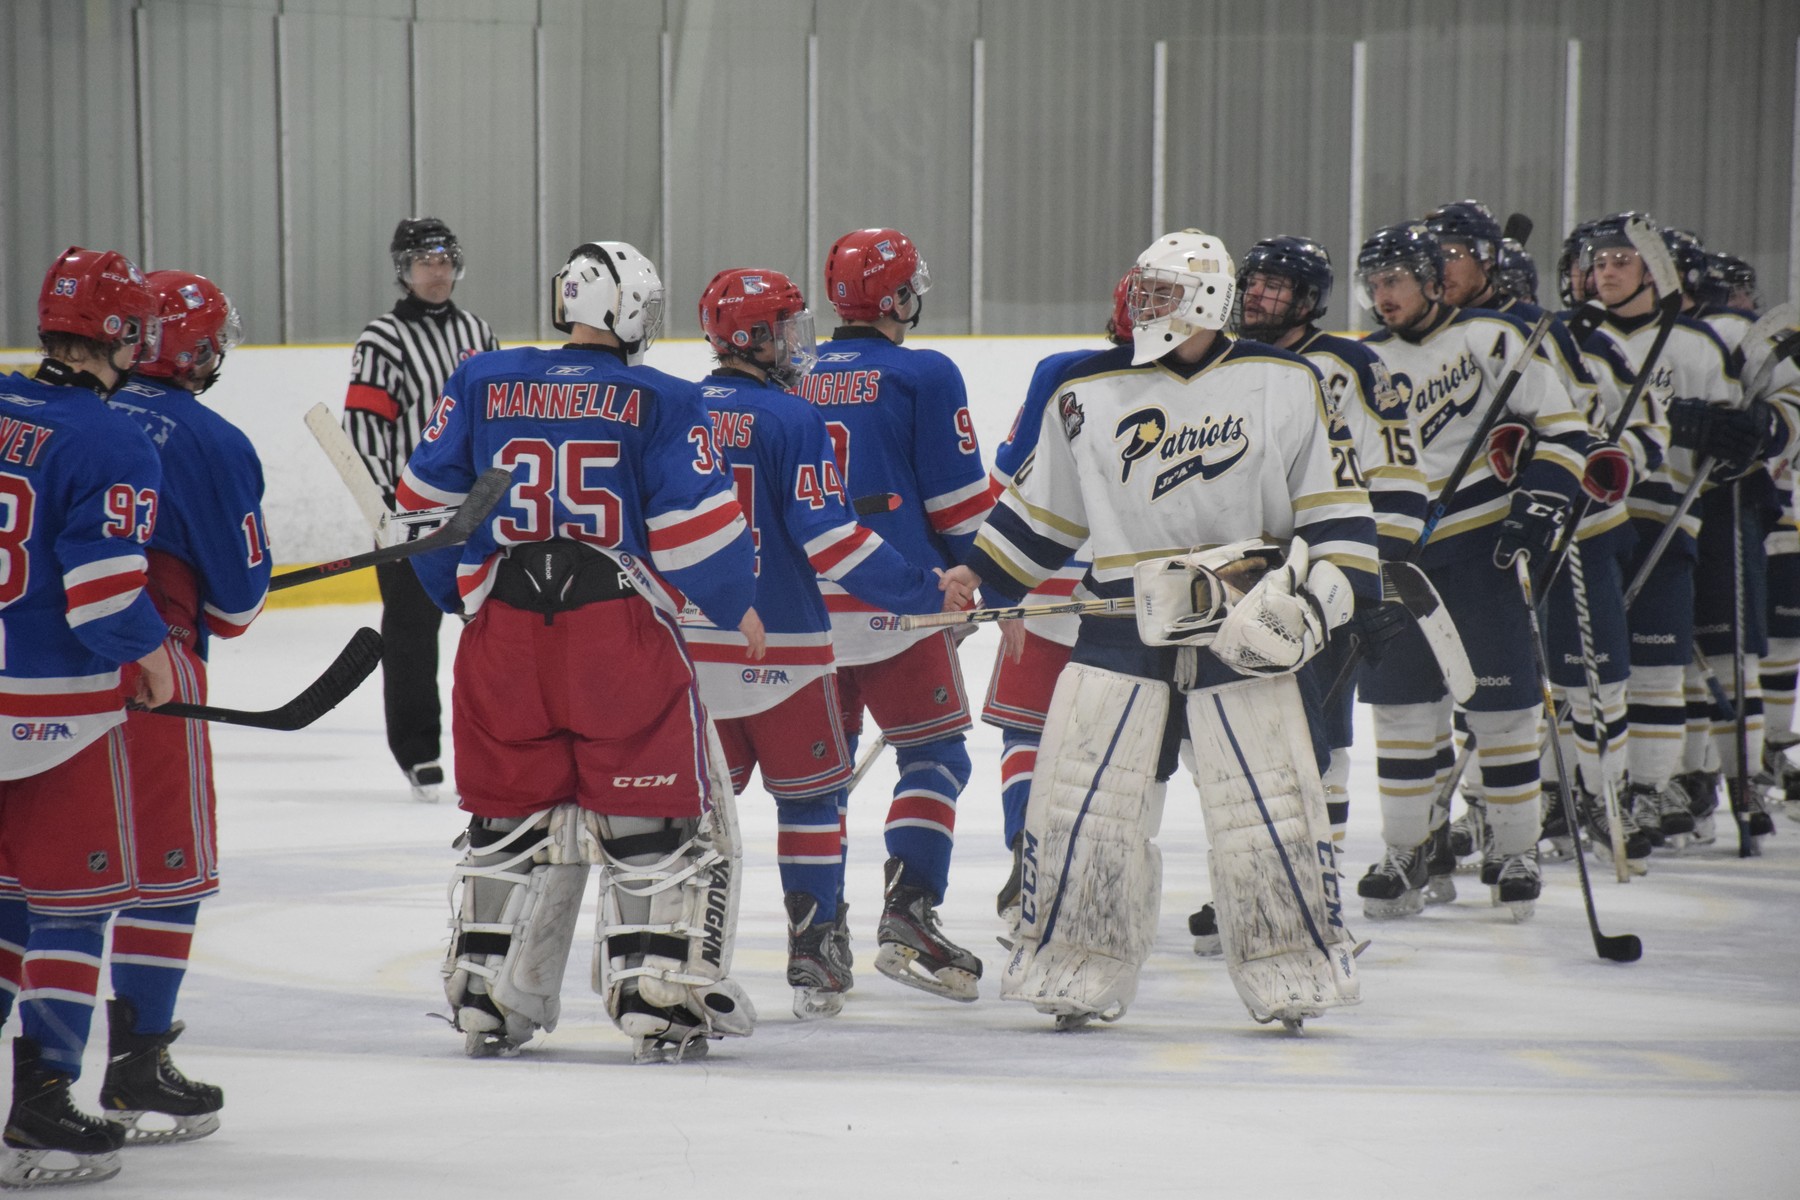 Toronto Patriots shake hands at the end of the game against the Oakville Blades | Scott Ellis - The Hockey House